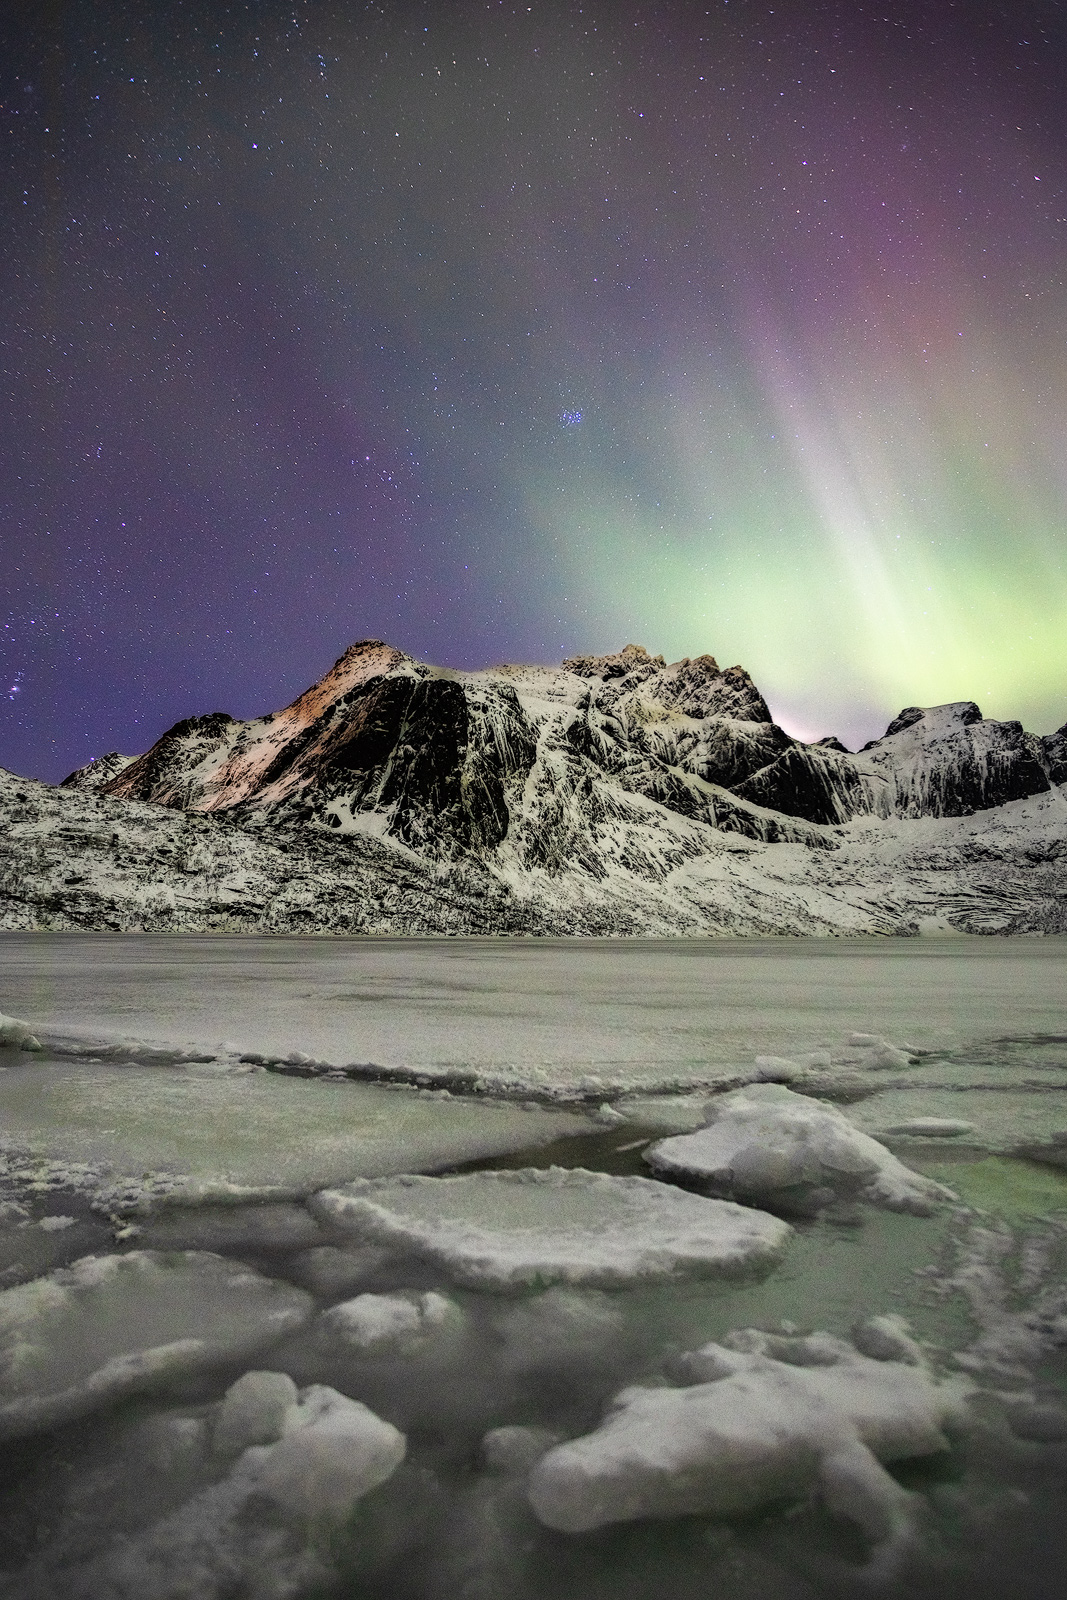 Colorful aurora beams rise over Lofoten's snow-covered mountains.